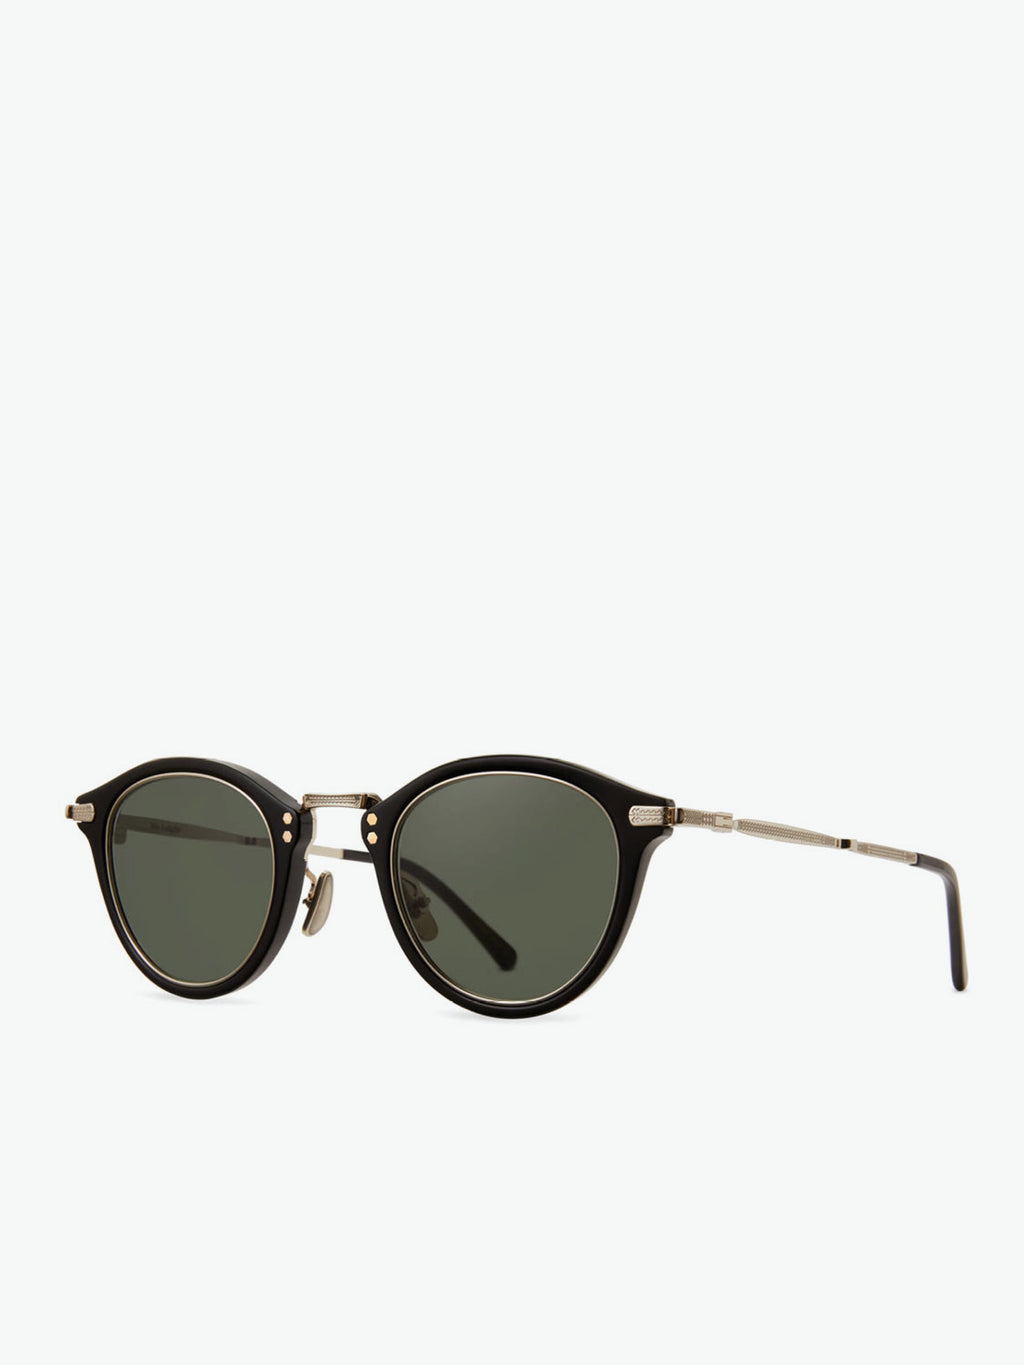 Mr Leight Rounded Black Sunglasses